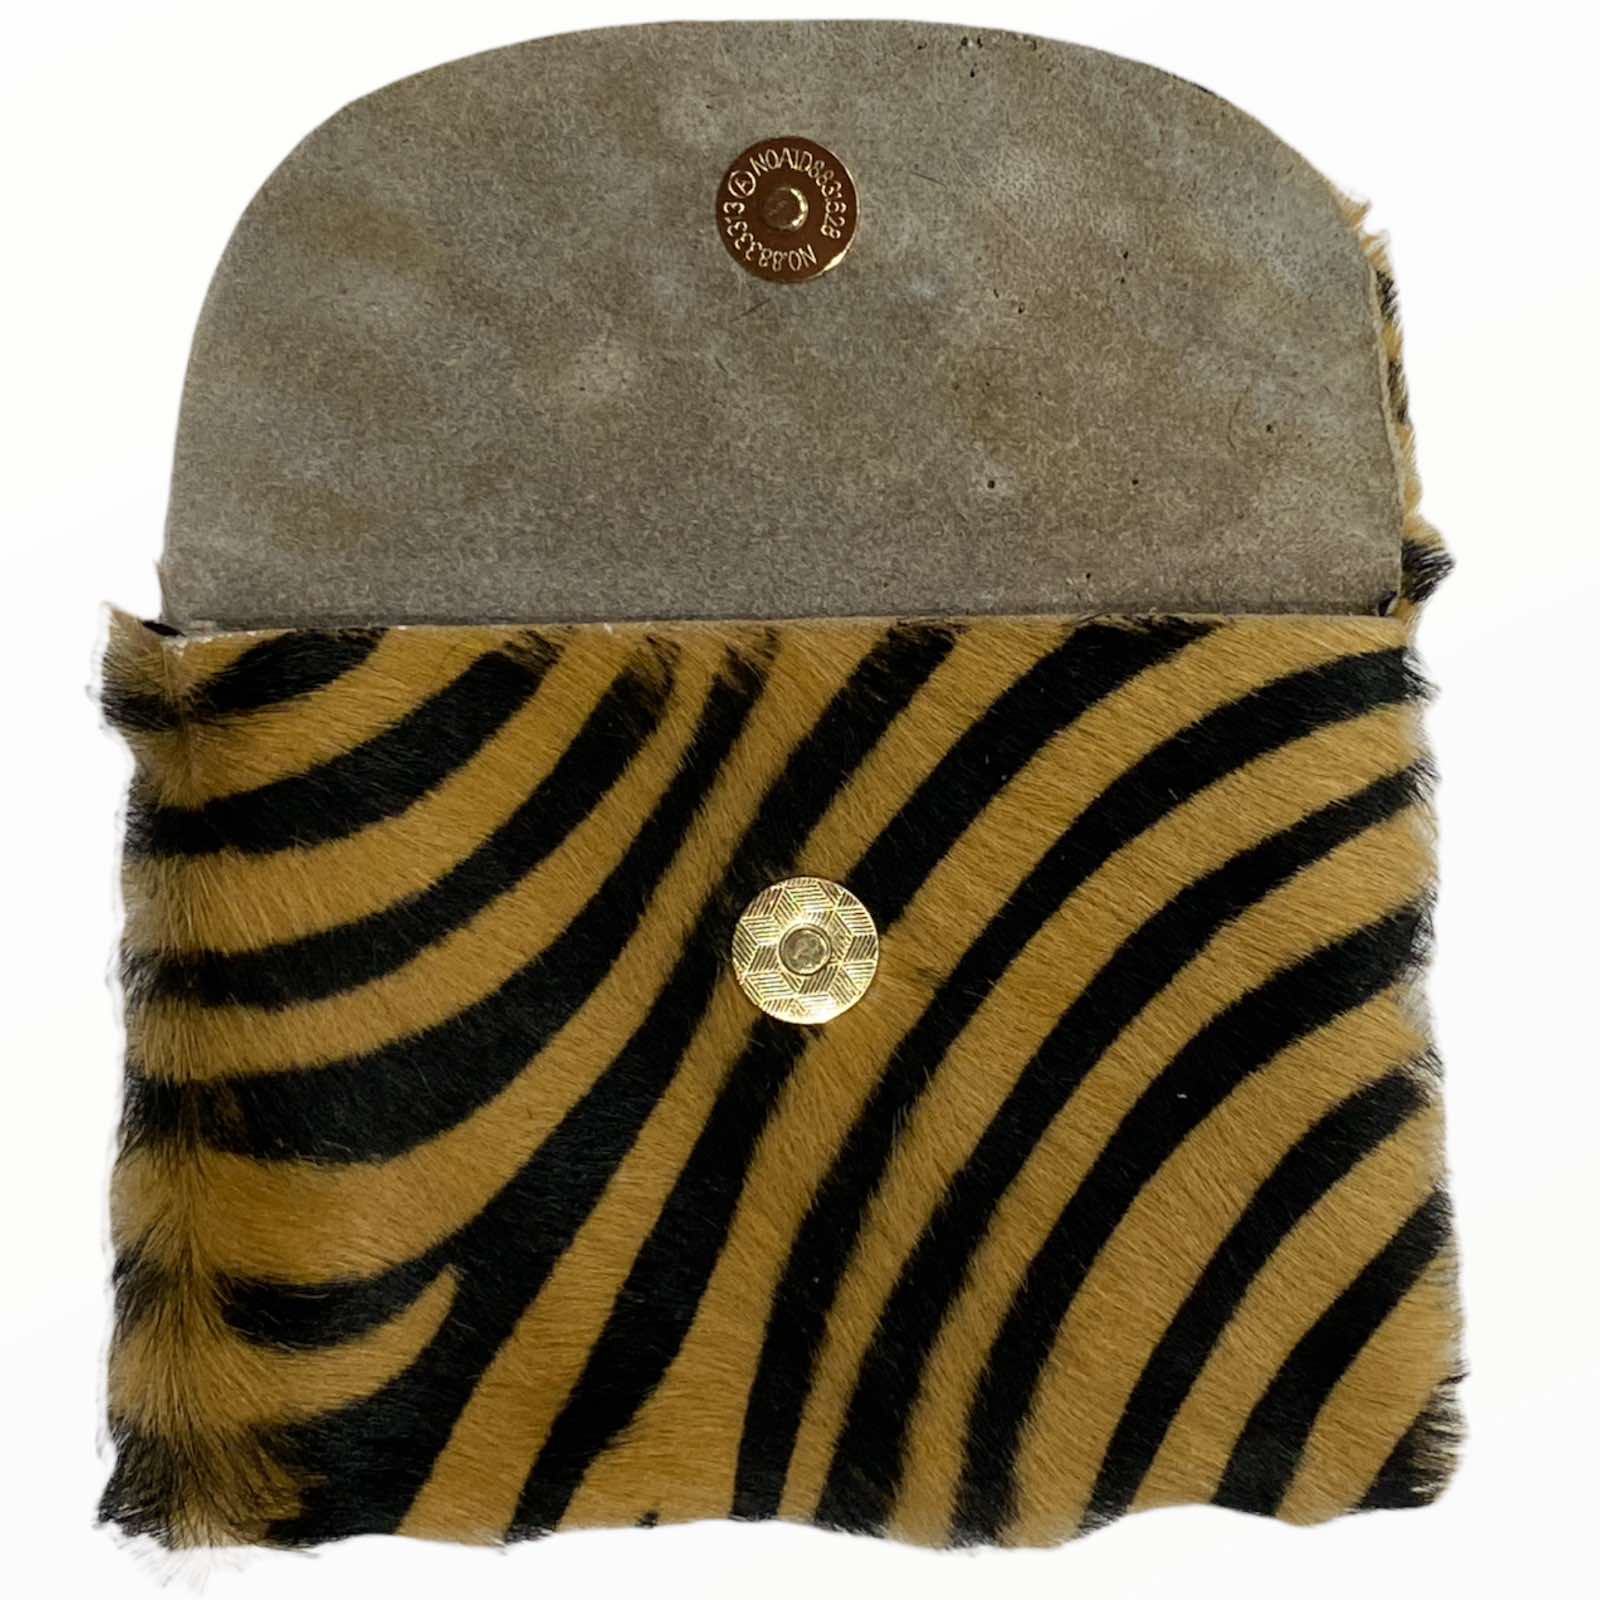 Zebra-print leather wallet for cards